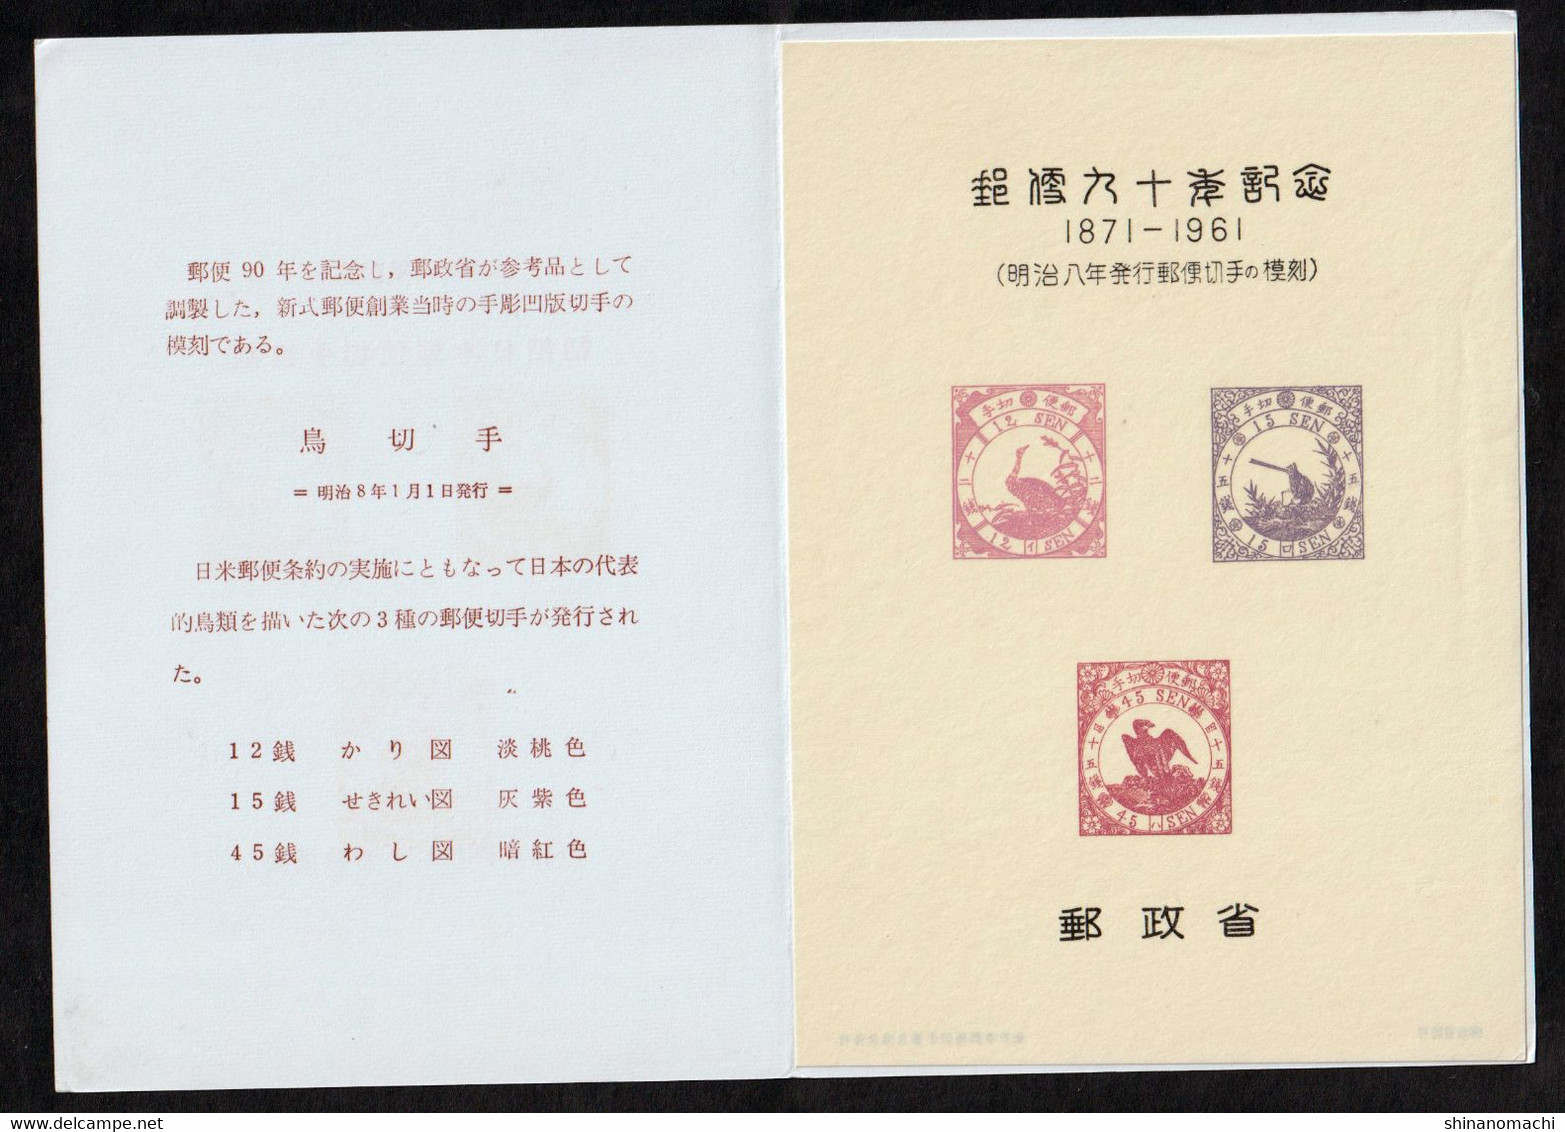 Japan - 1961-1963 - 90th anniversary of postal service 1st to 10th set of all types (with inscription & tower)